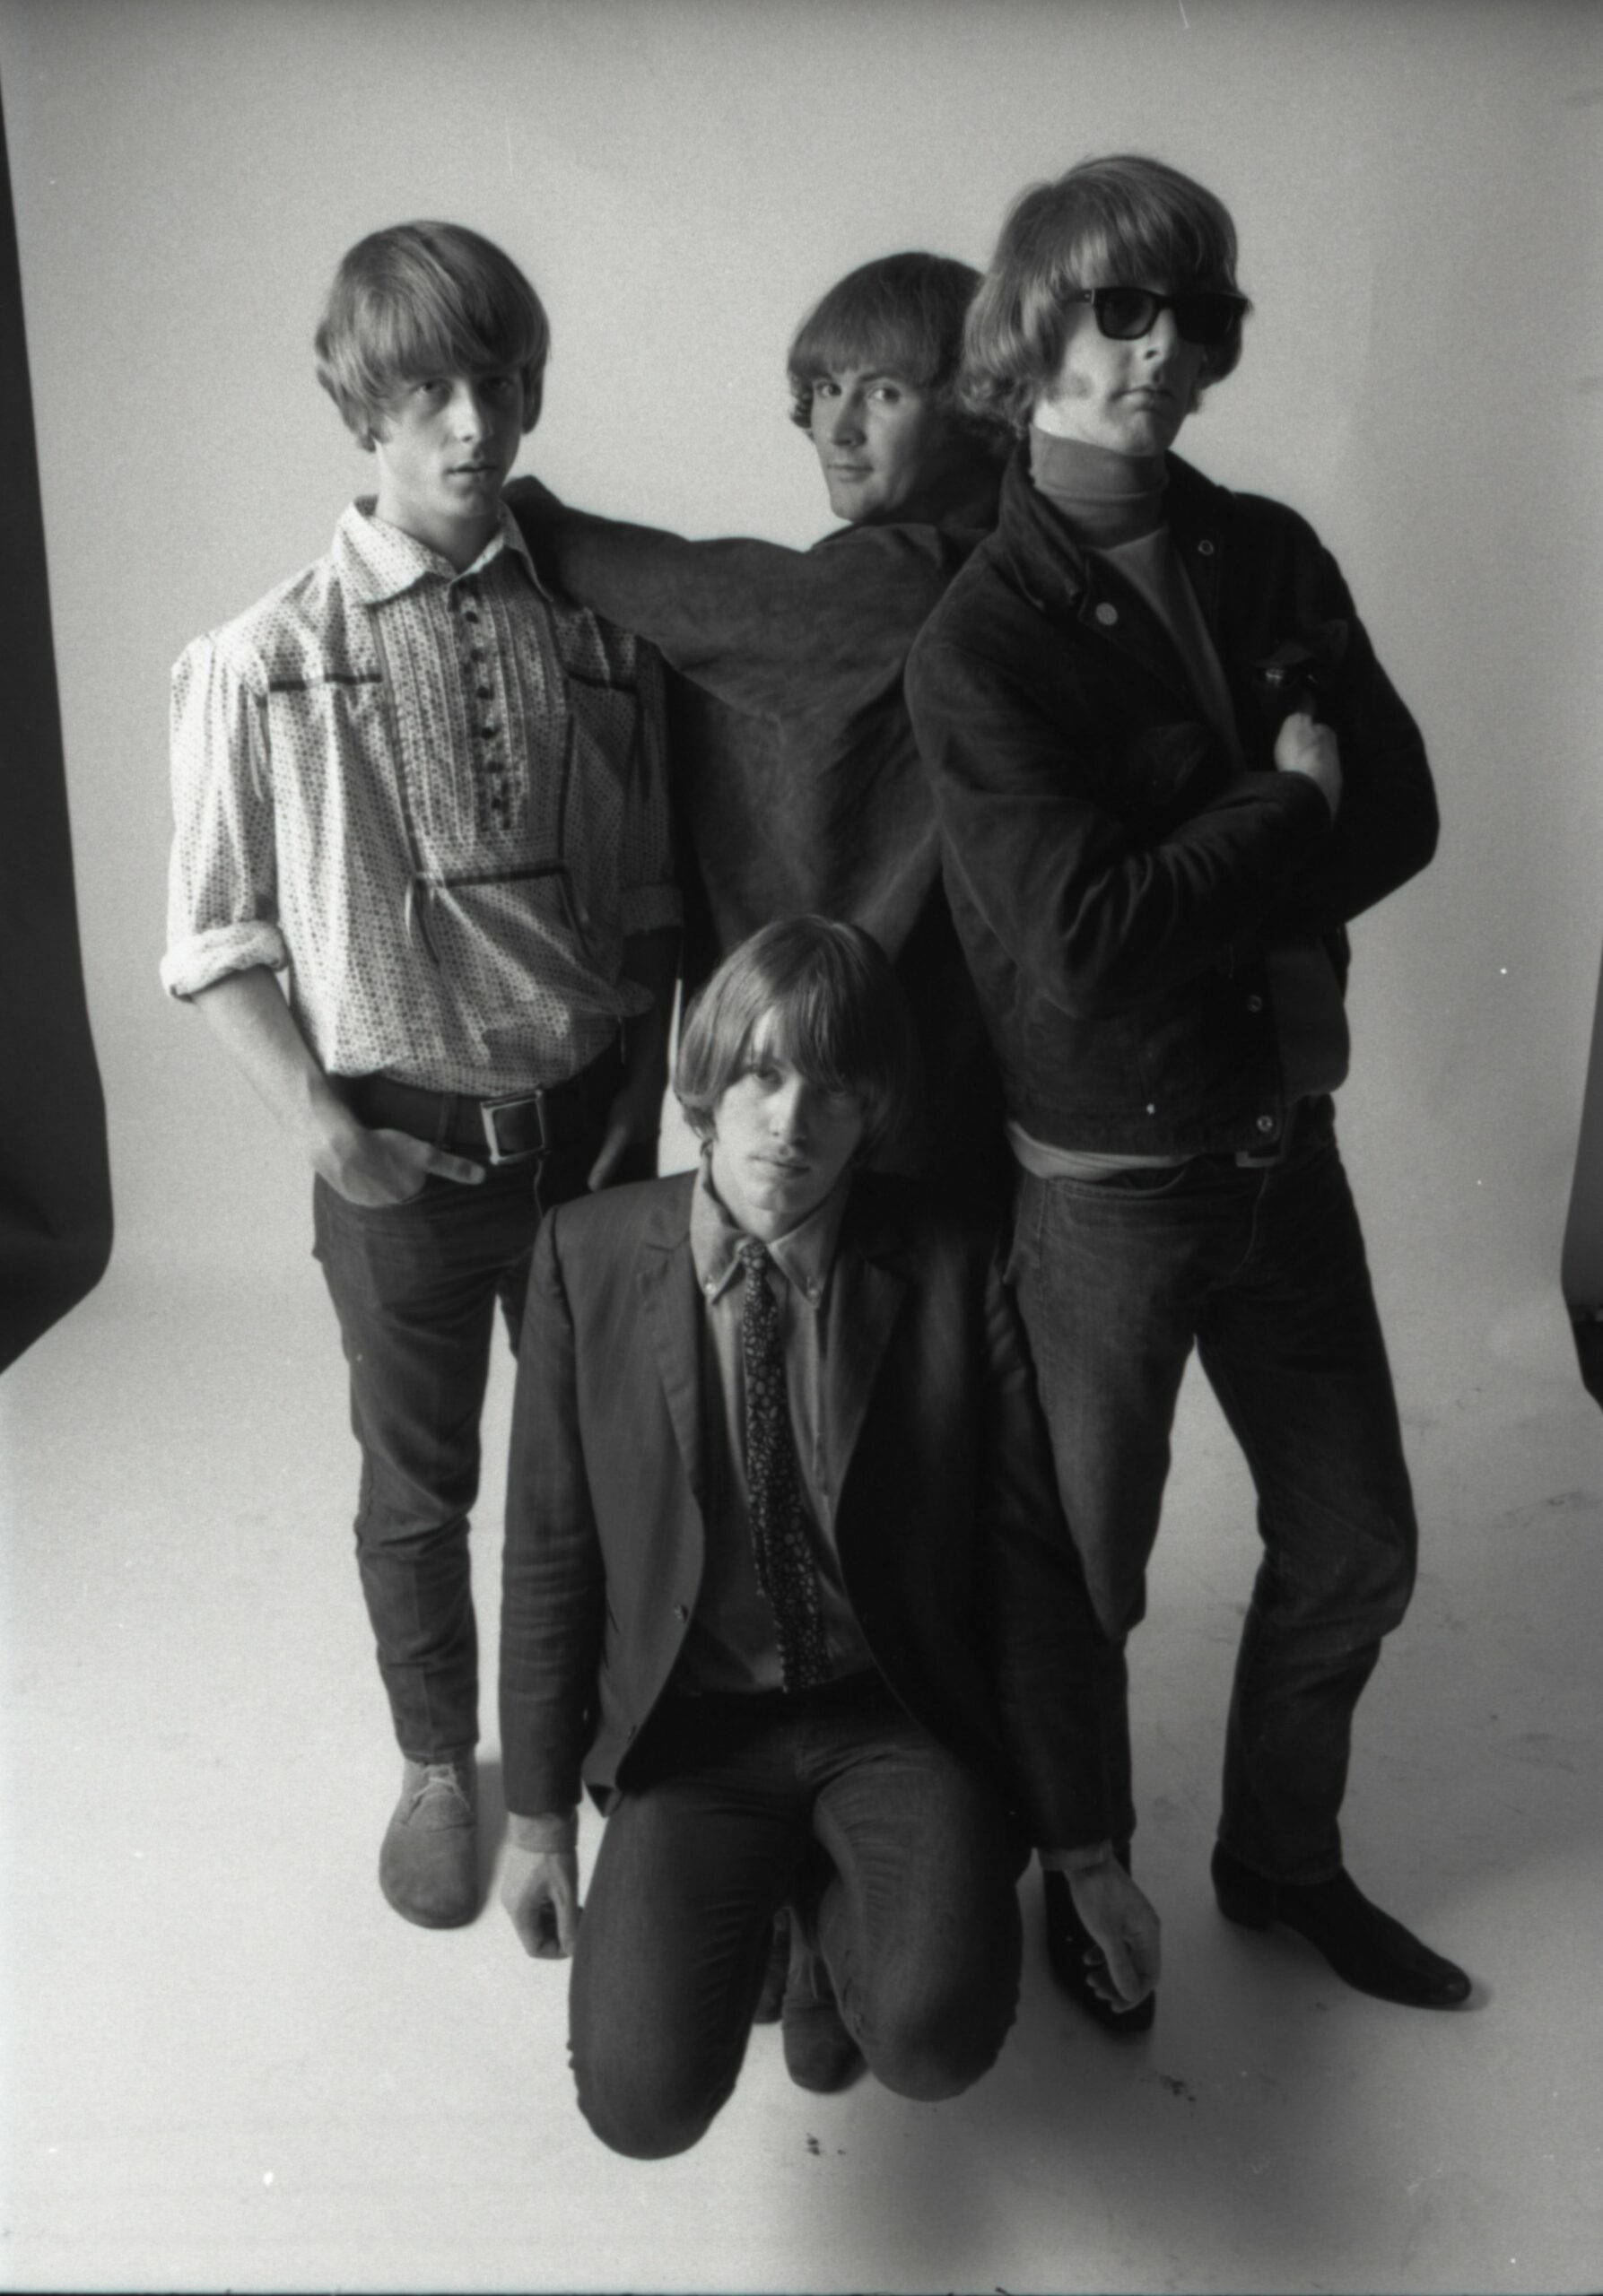 The Byrds Fifth Dimension photo shoot